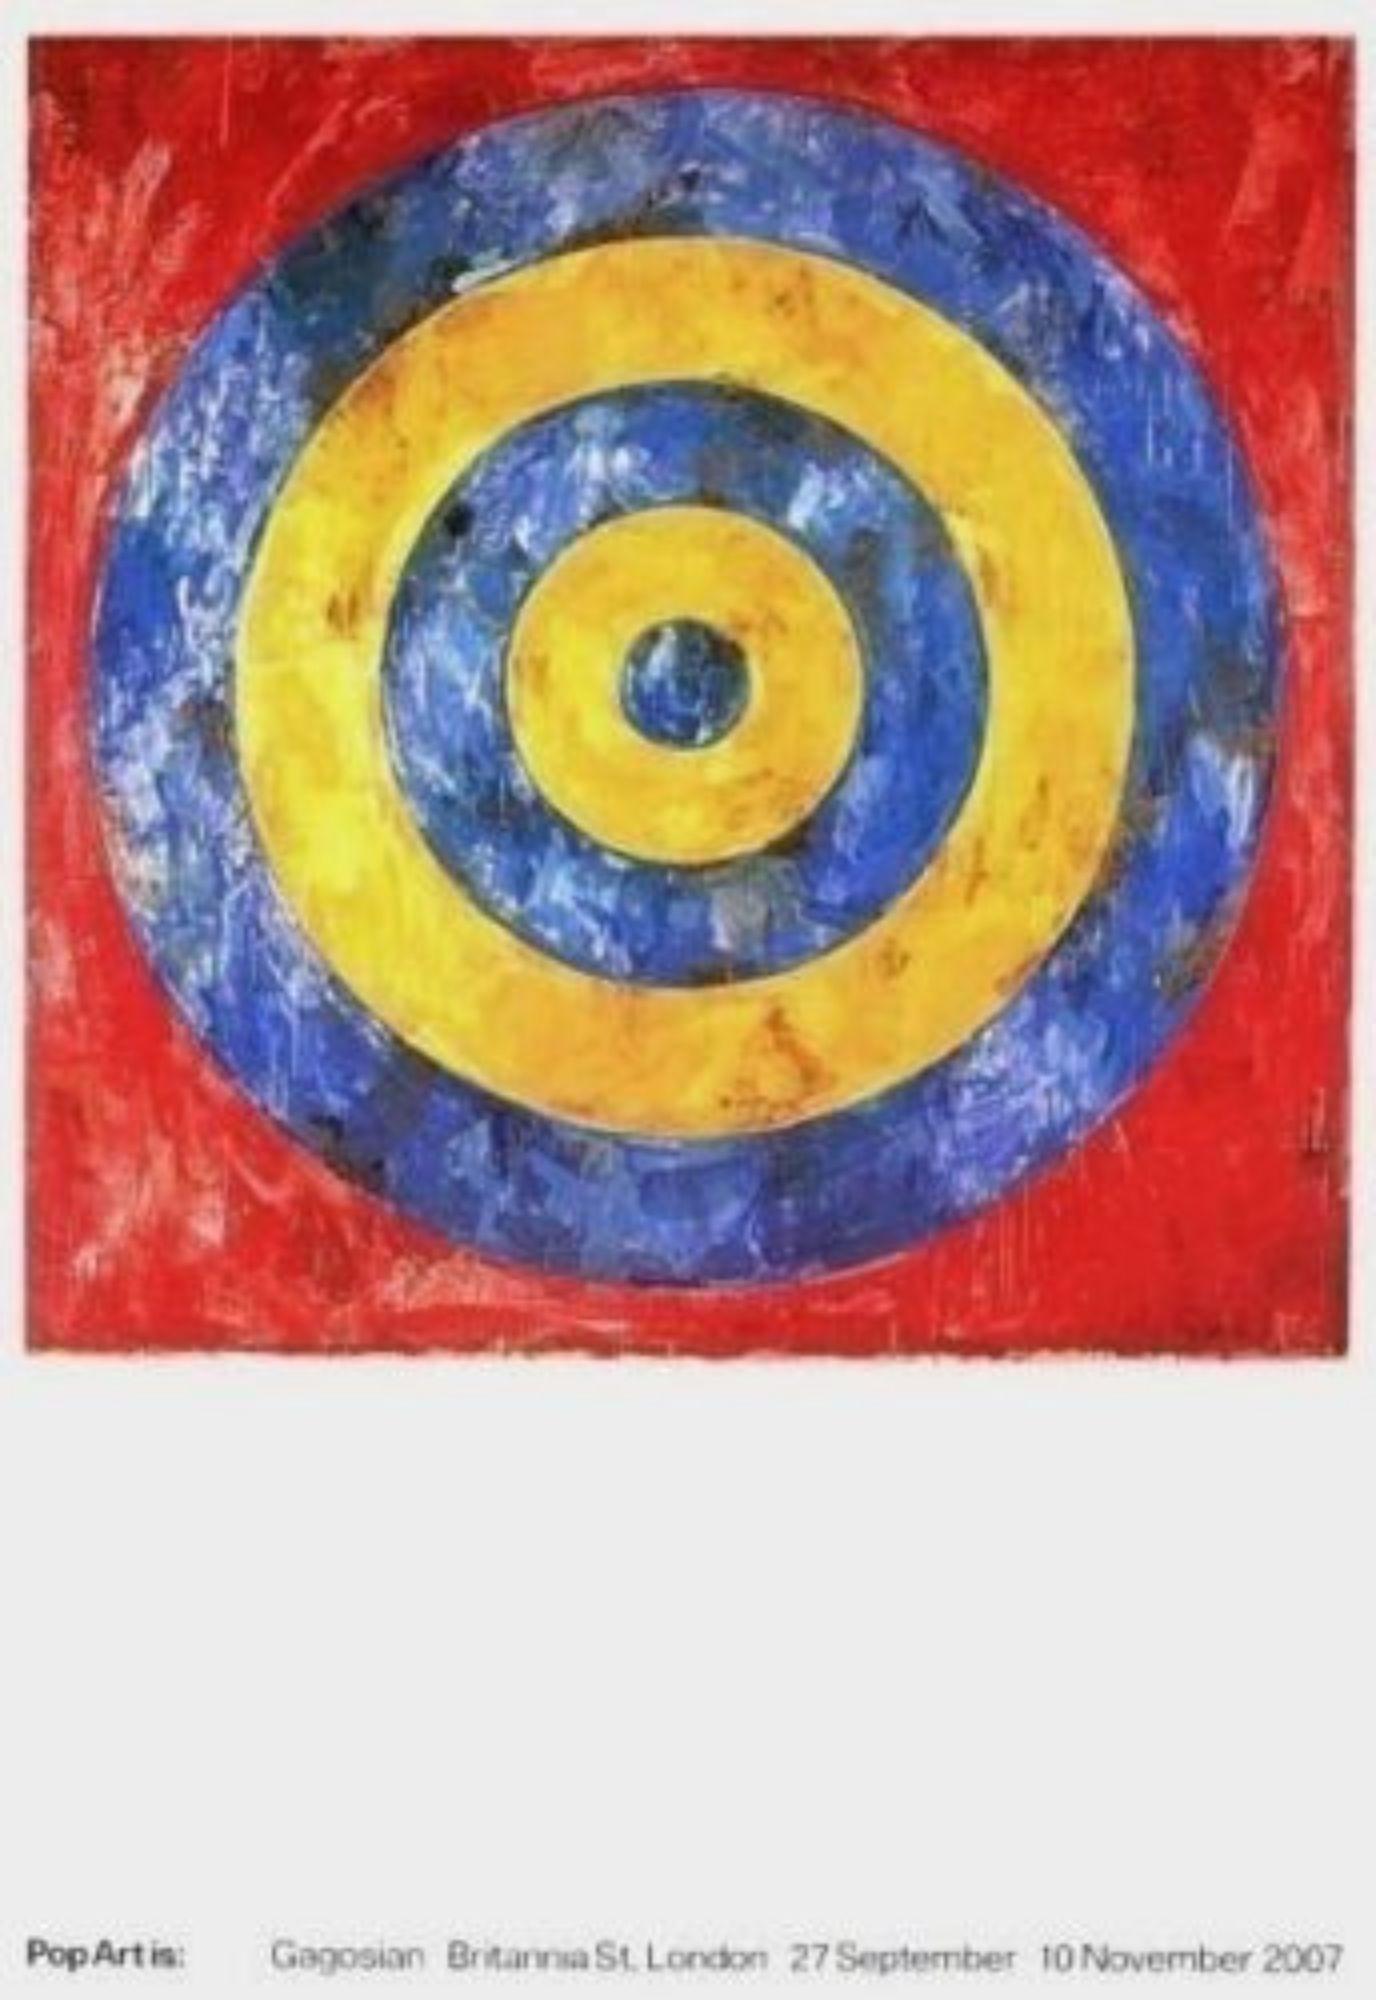 JASPER JOHNS (1930-  ) Painter, sculptor, and print-maker, Jasper Johns became one of America's best-known post-Abstract Expressionists and Minimalists, though he is often considered within the Pop Art movement. Johns’ subject matter often includes